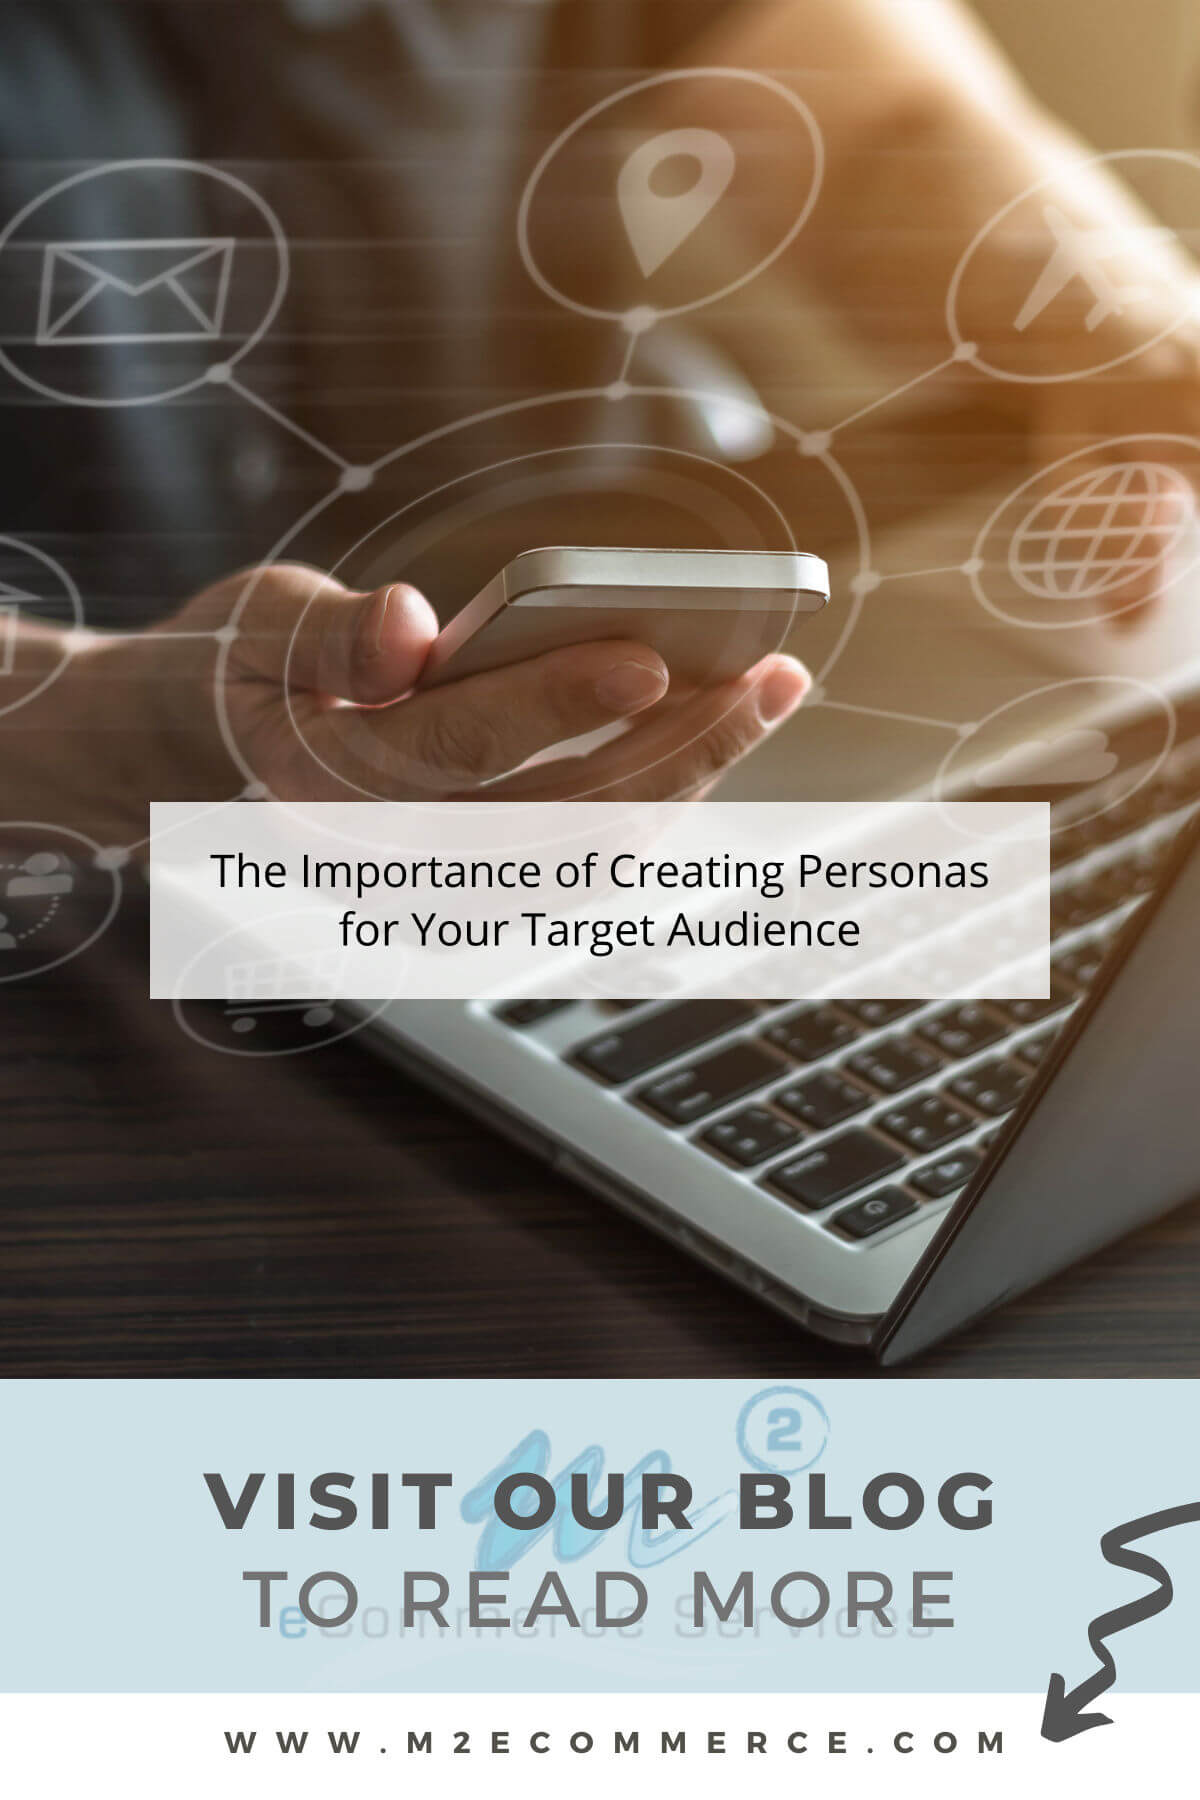 The Importance of Creating Personas for Your Target Audience